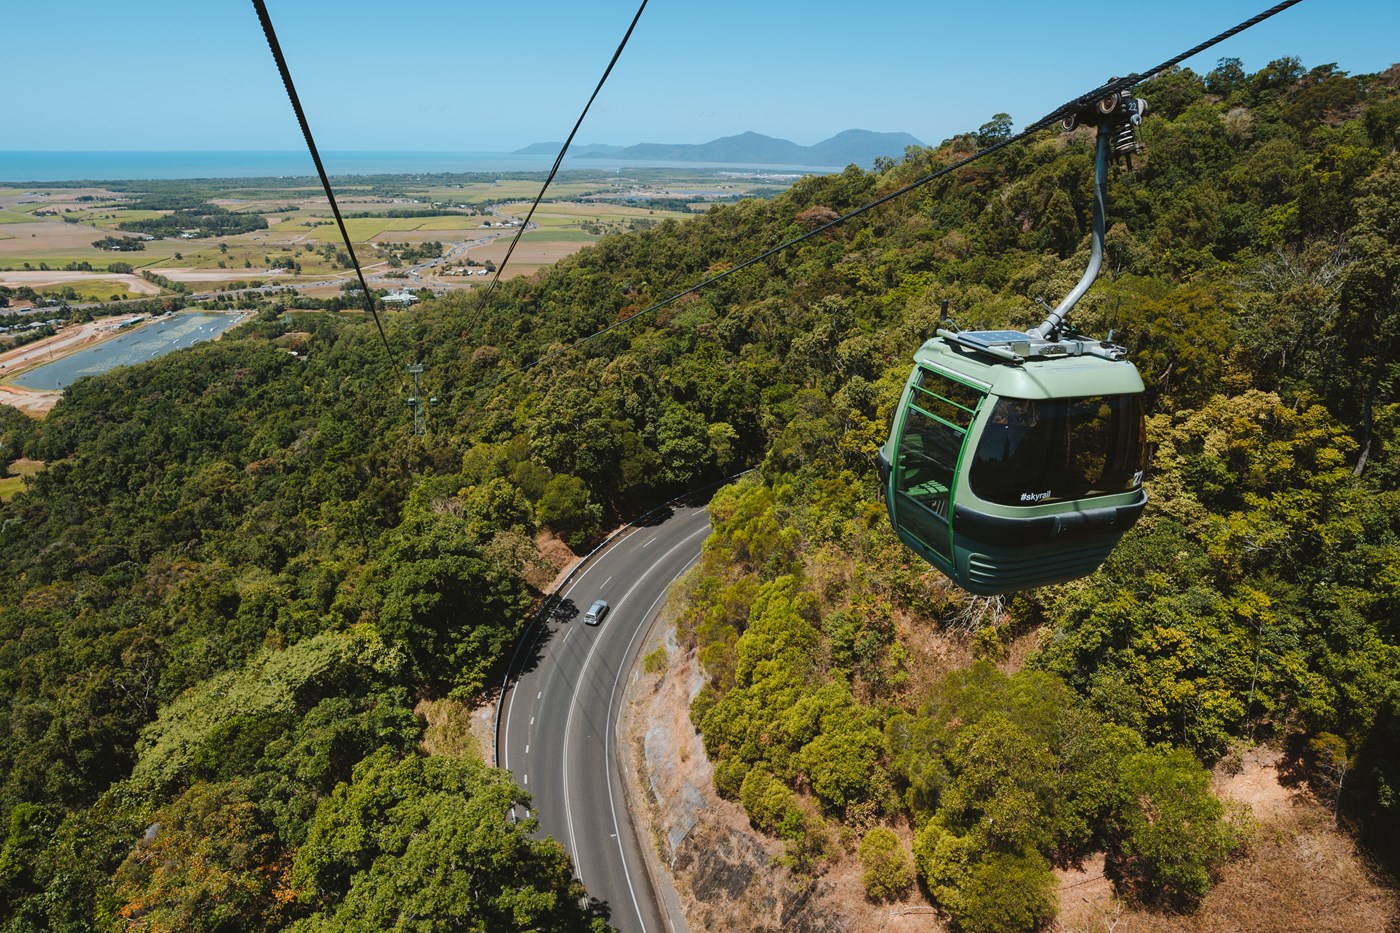 A cable car over a dense rainforest and a winding road beneath it